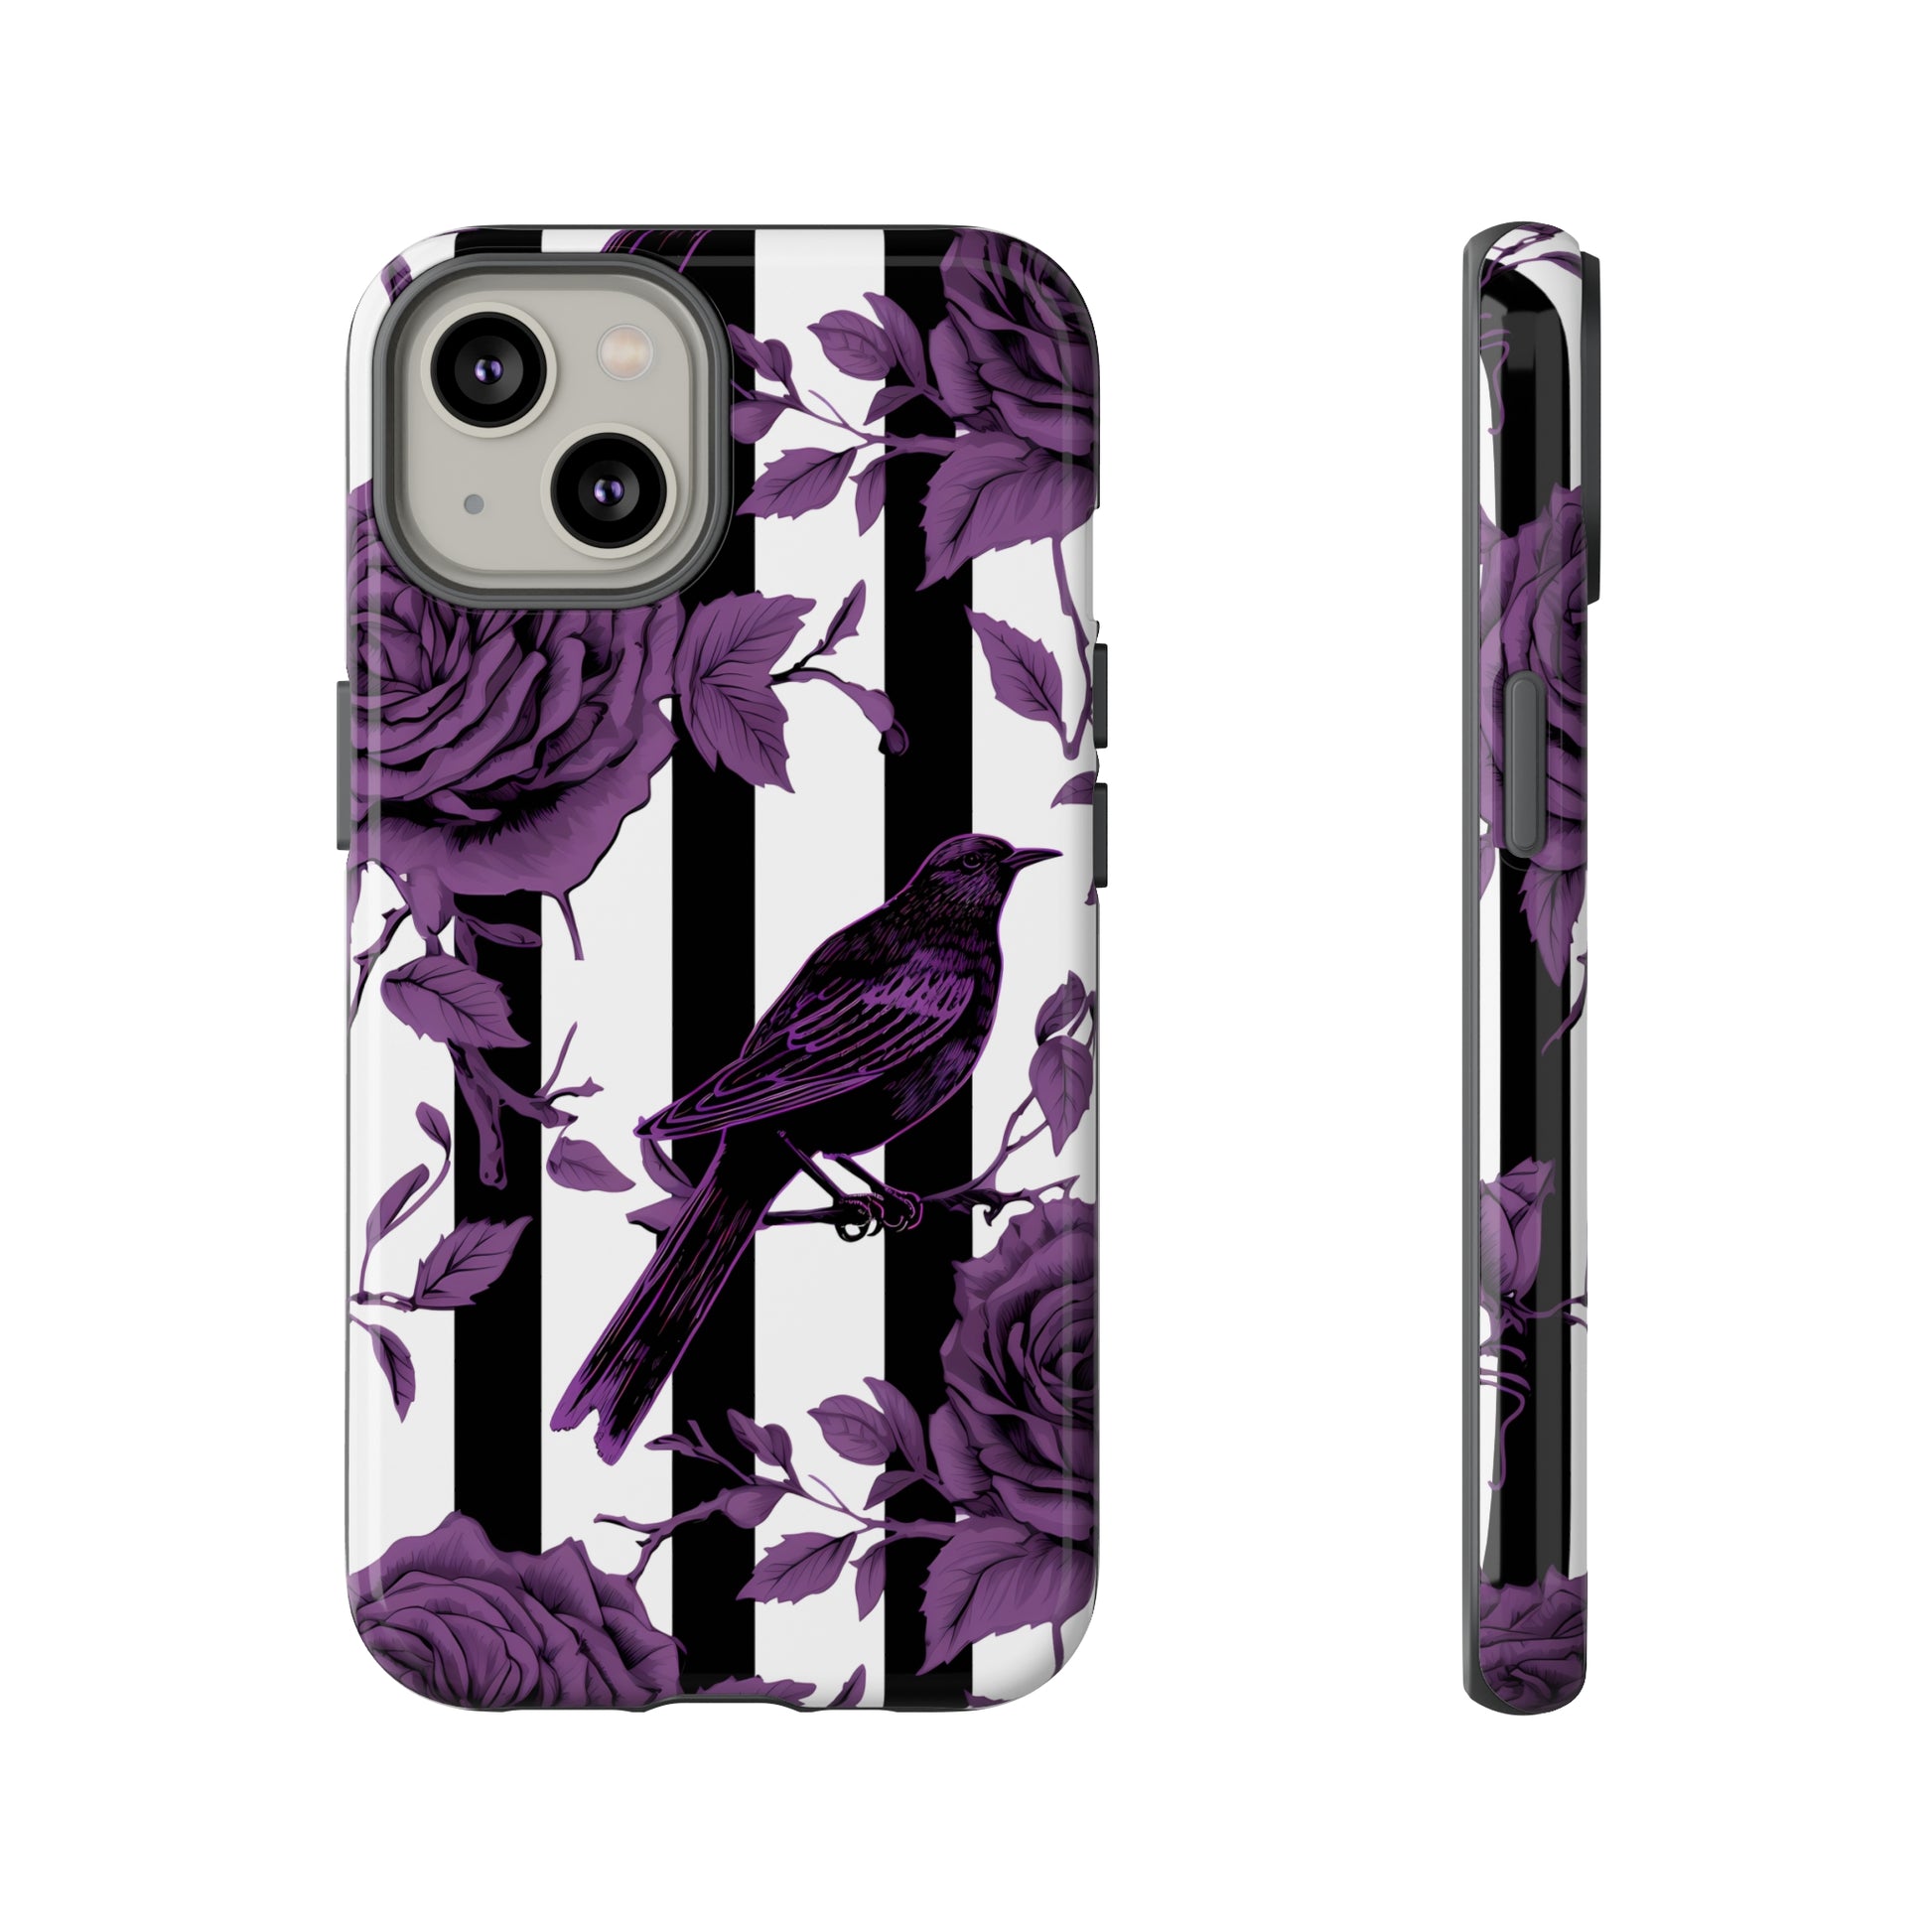 Striped Crows and Roses Tough Cases for iPhone Samsung Google PhonesPhone CaseVTZdesignsiPhone 14GlossyAccessoriescrowsGlossy